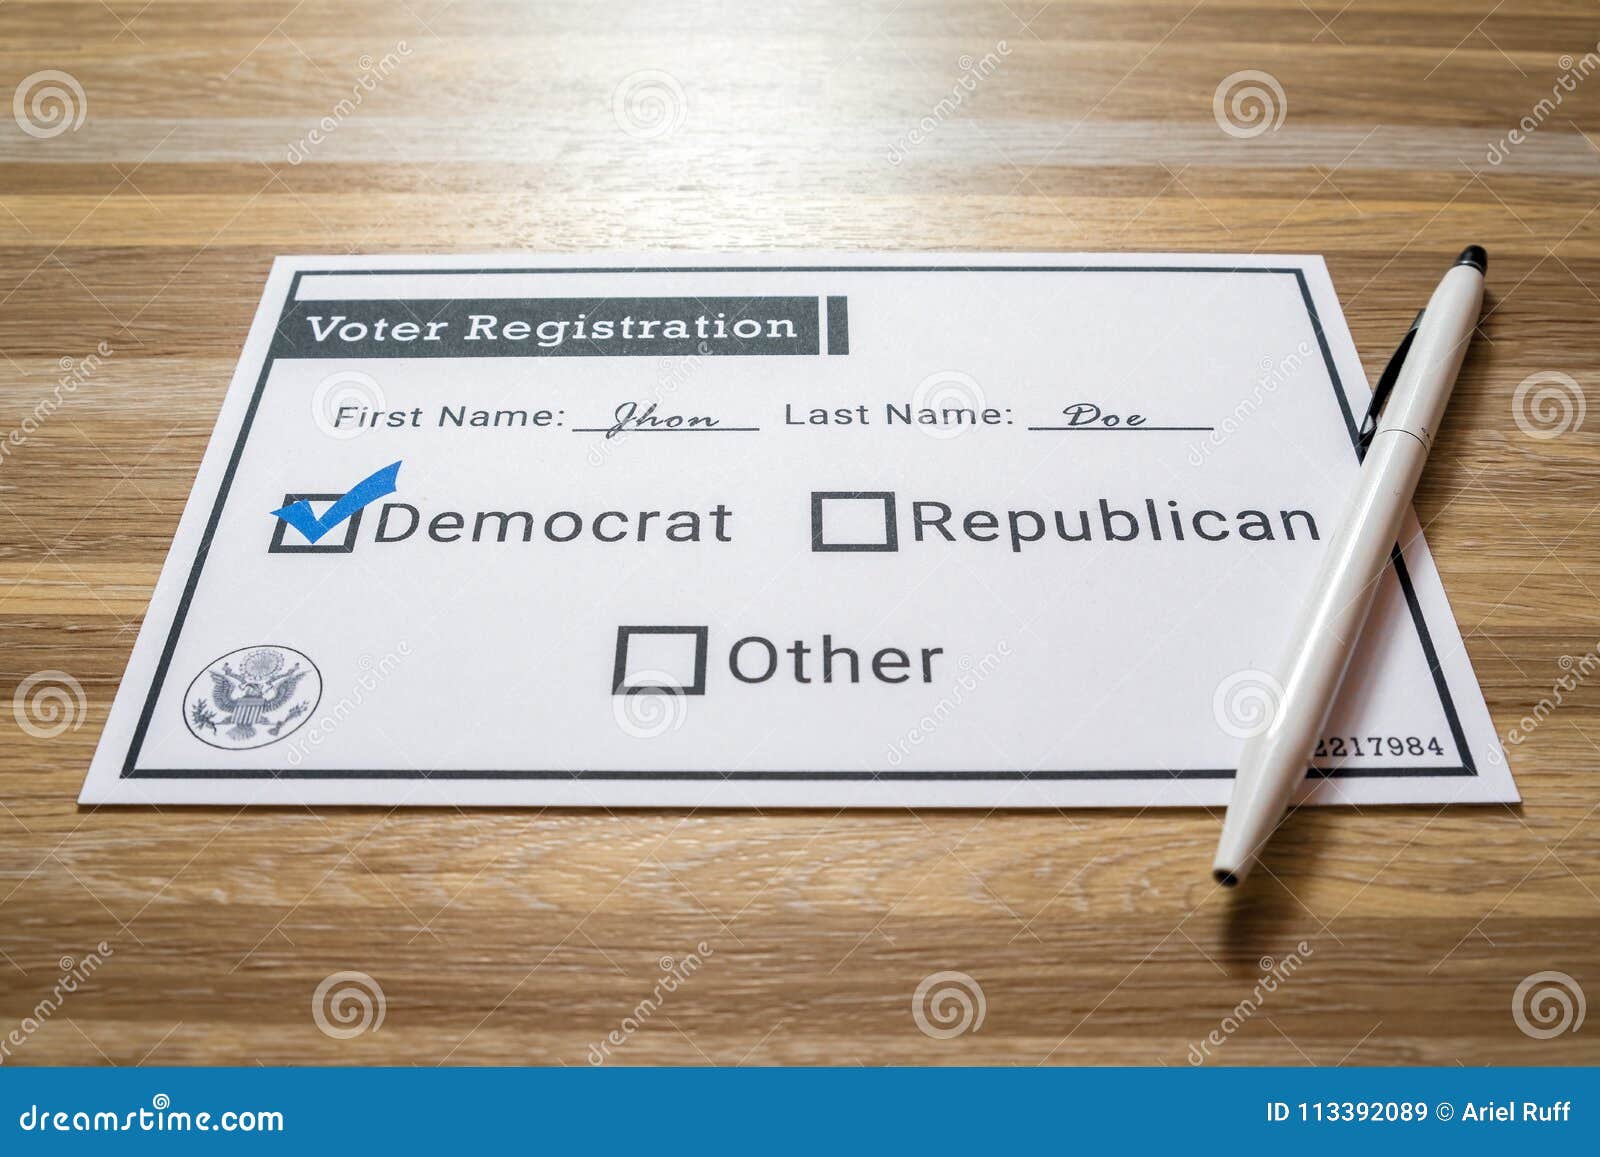 voter registration card with democratic party selected